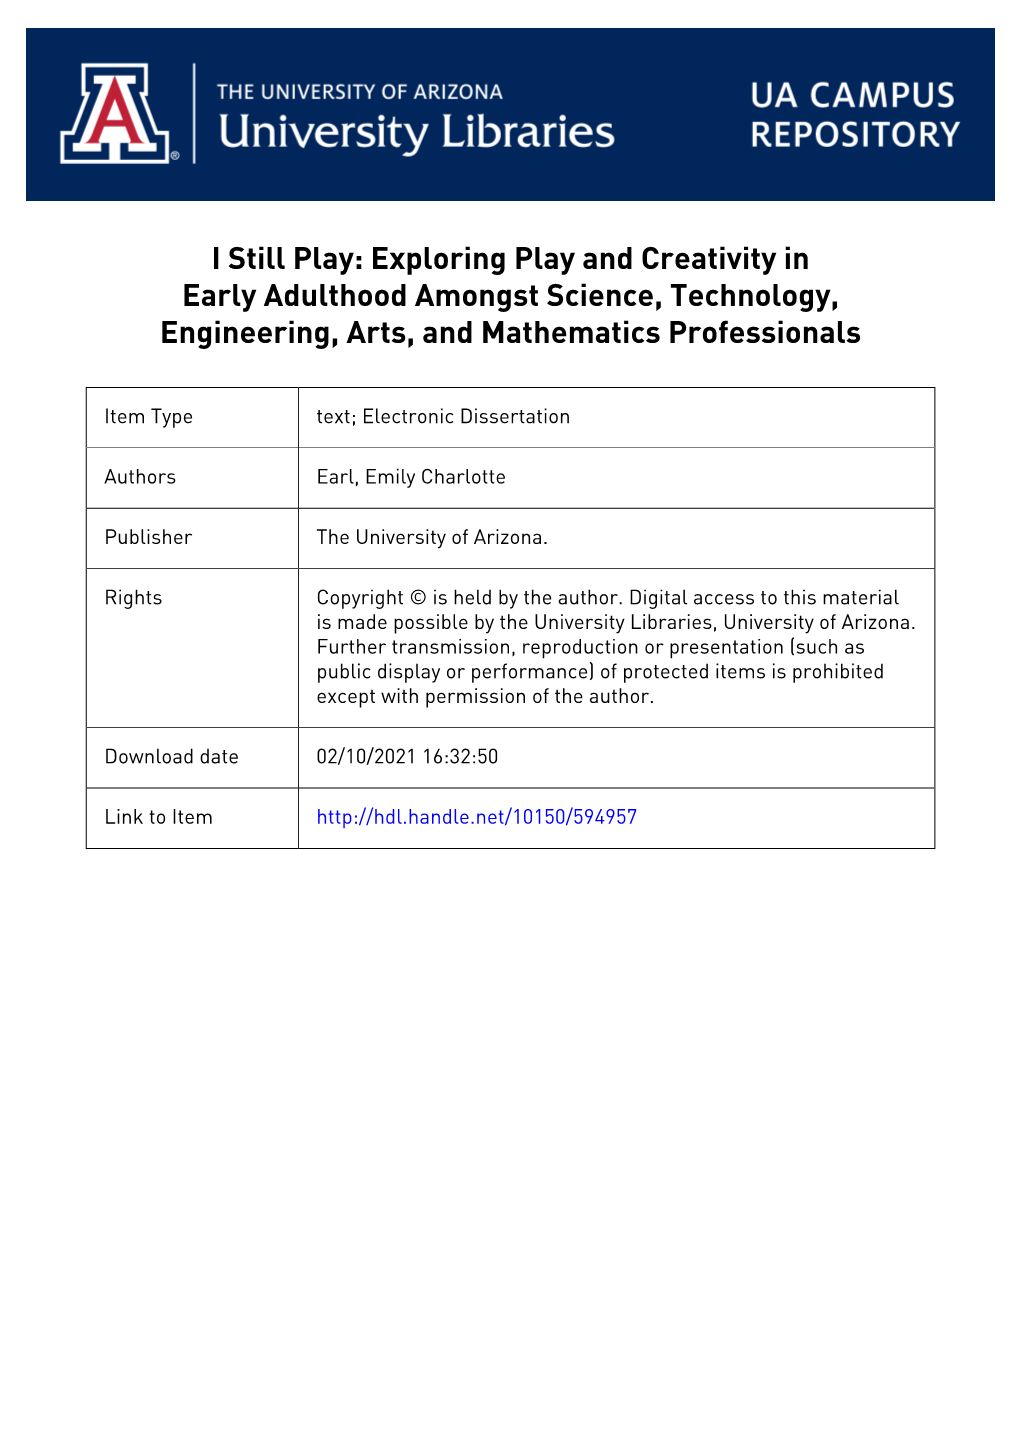 Exploring Play and Creativity in Early Adulthood Amongst Science, Technology, Engineering, Arts, and Mathematics Professionals